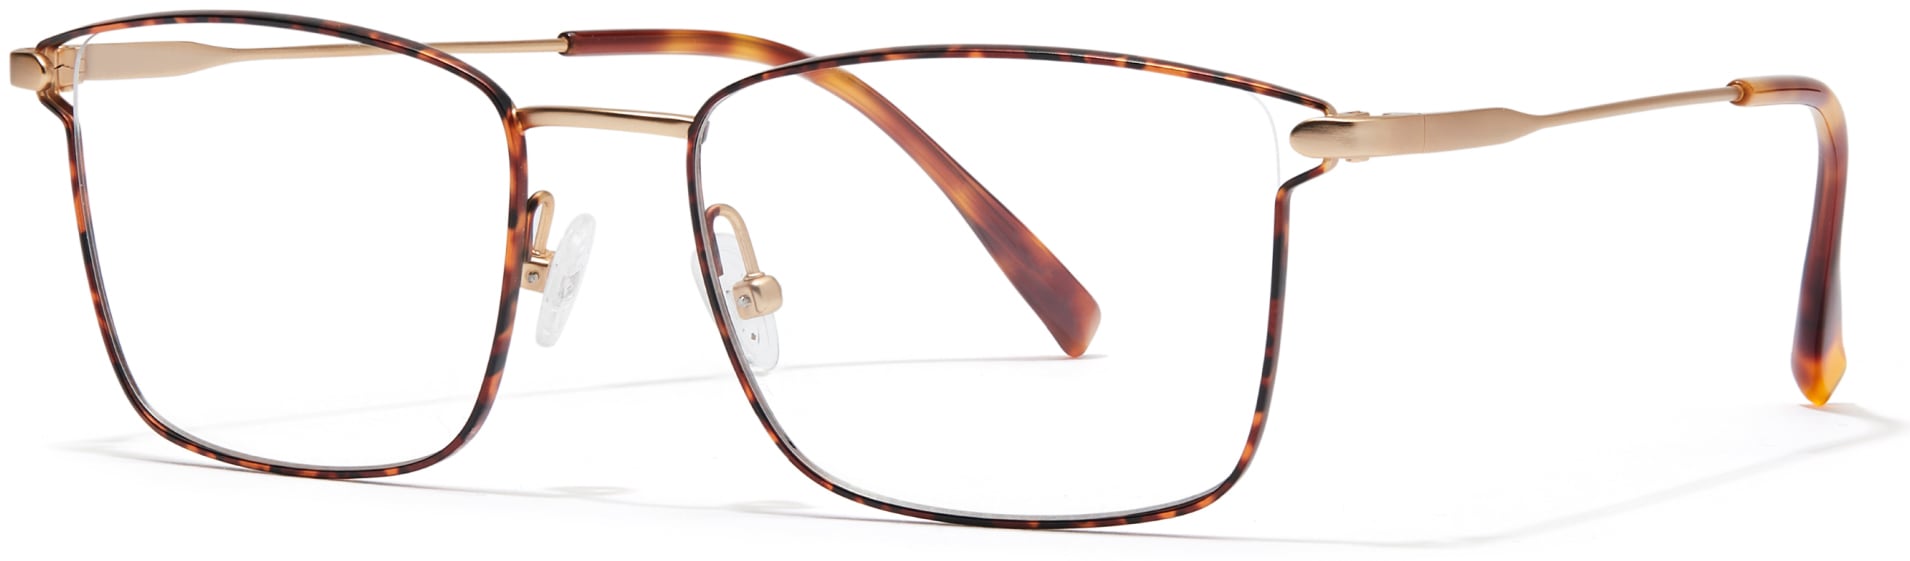 Image of a pair of zenni glasses that look thin and lightweight.